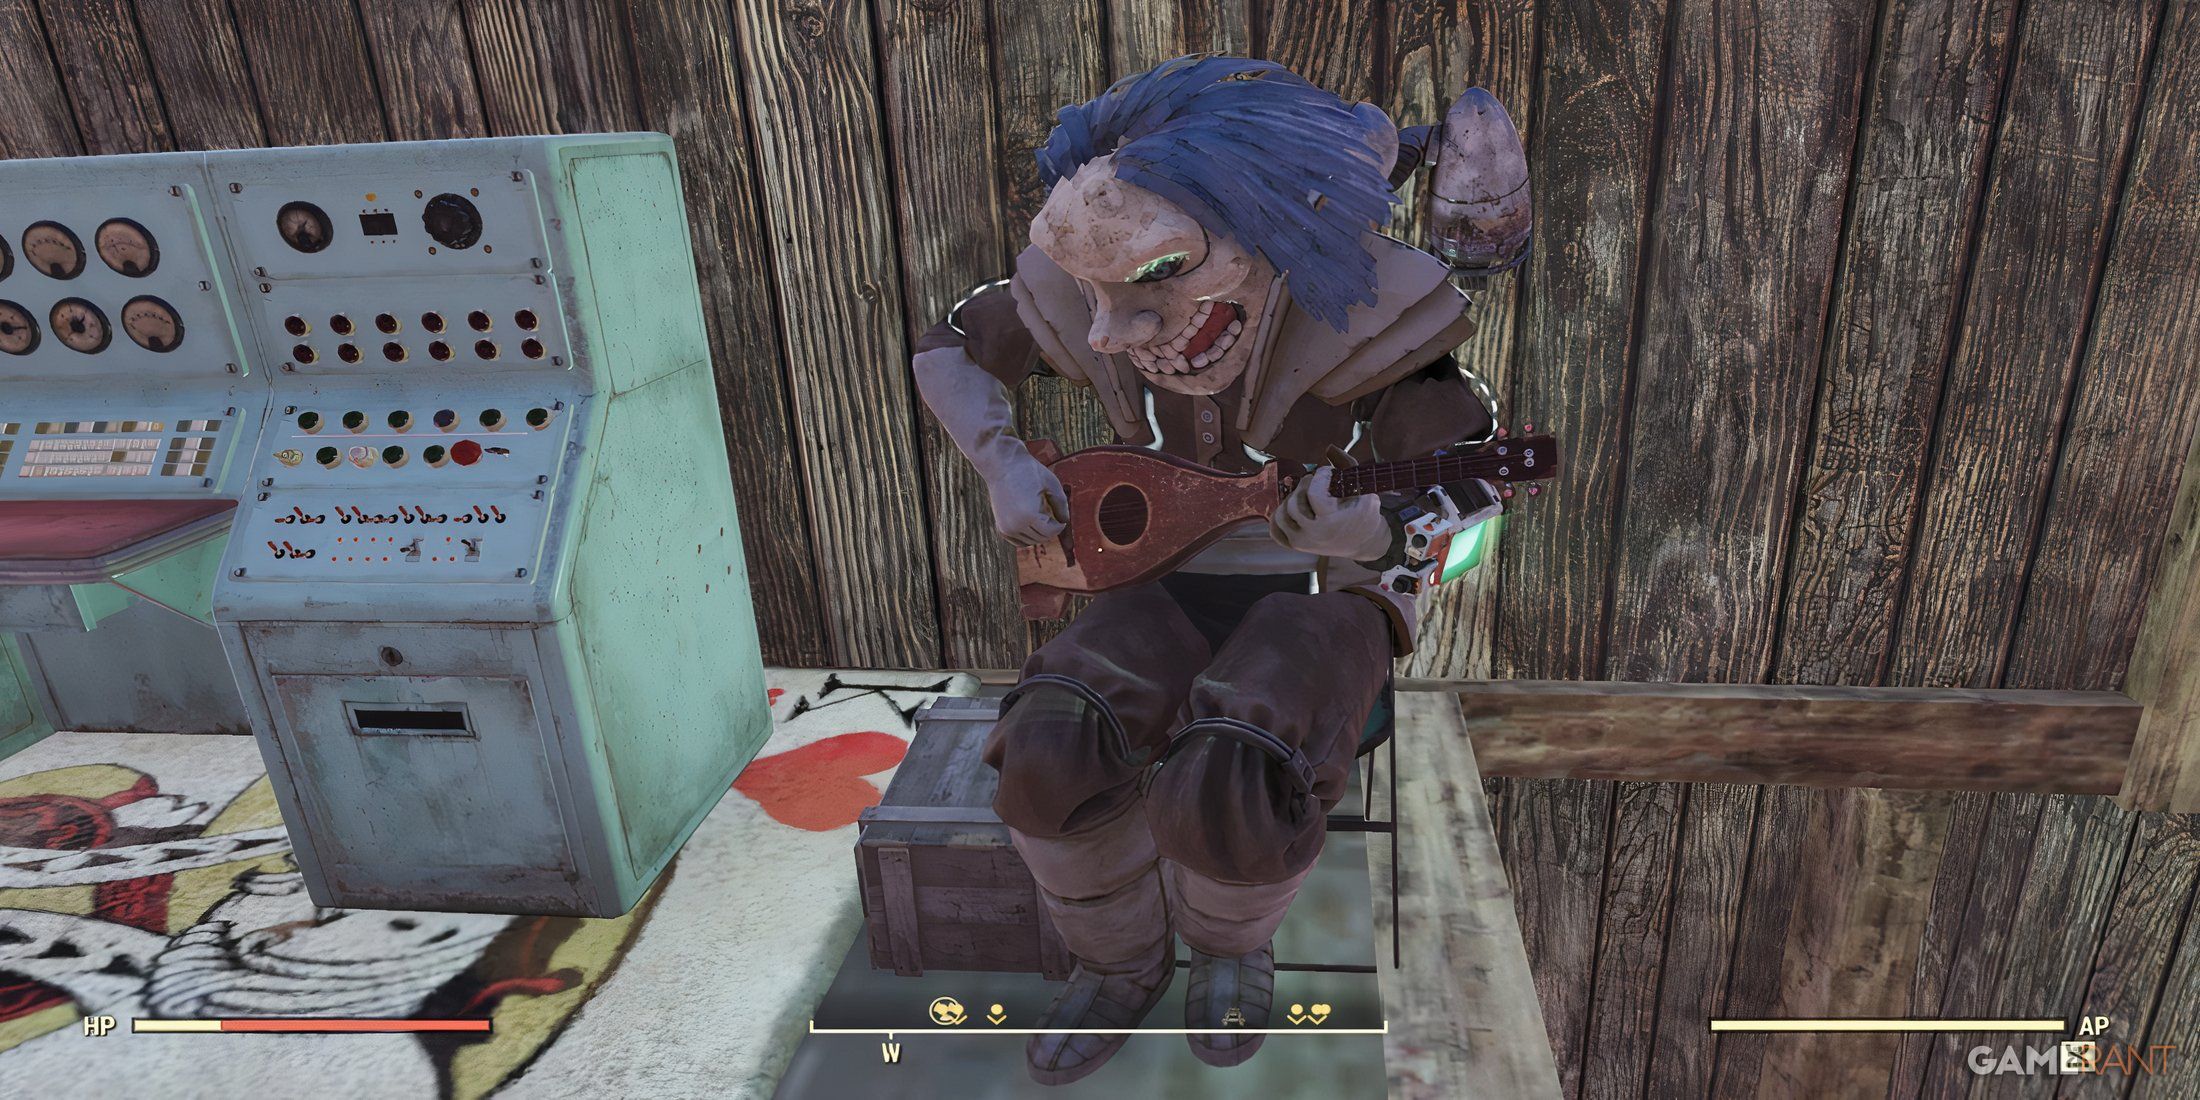 Playing an Instrument in Fallout 76